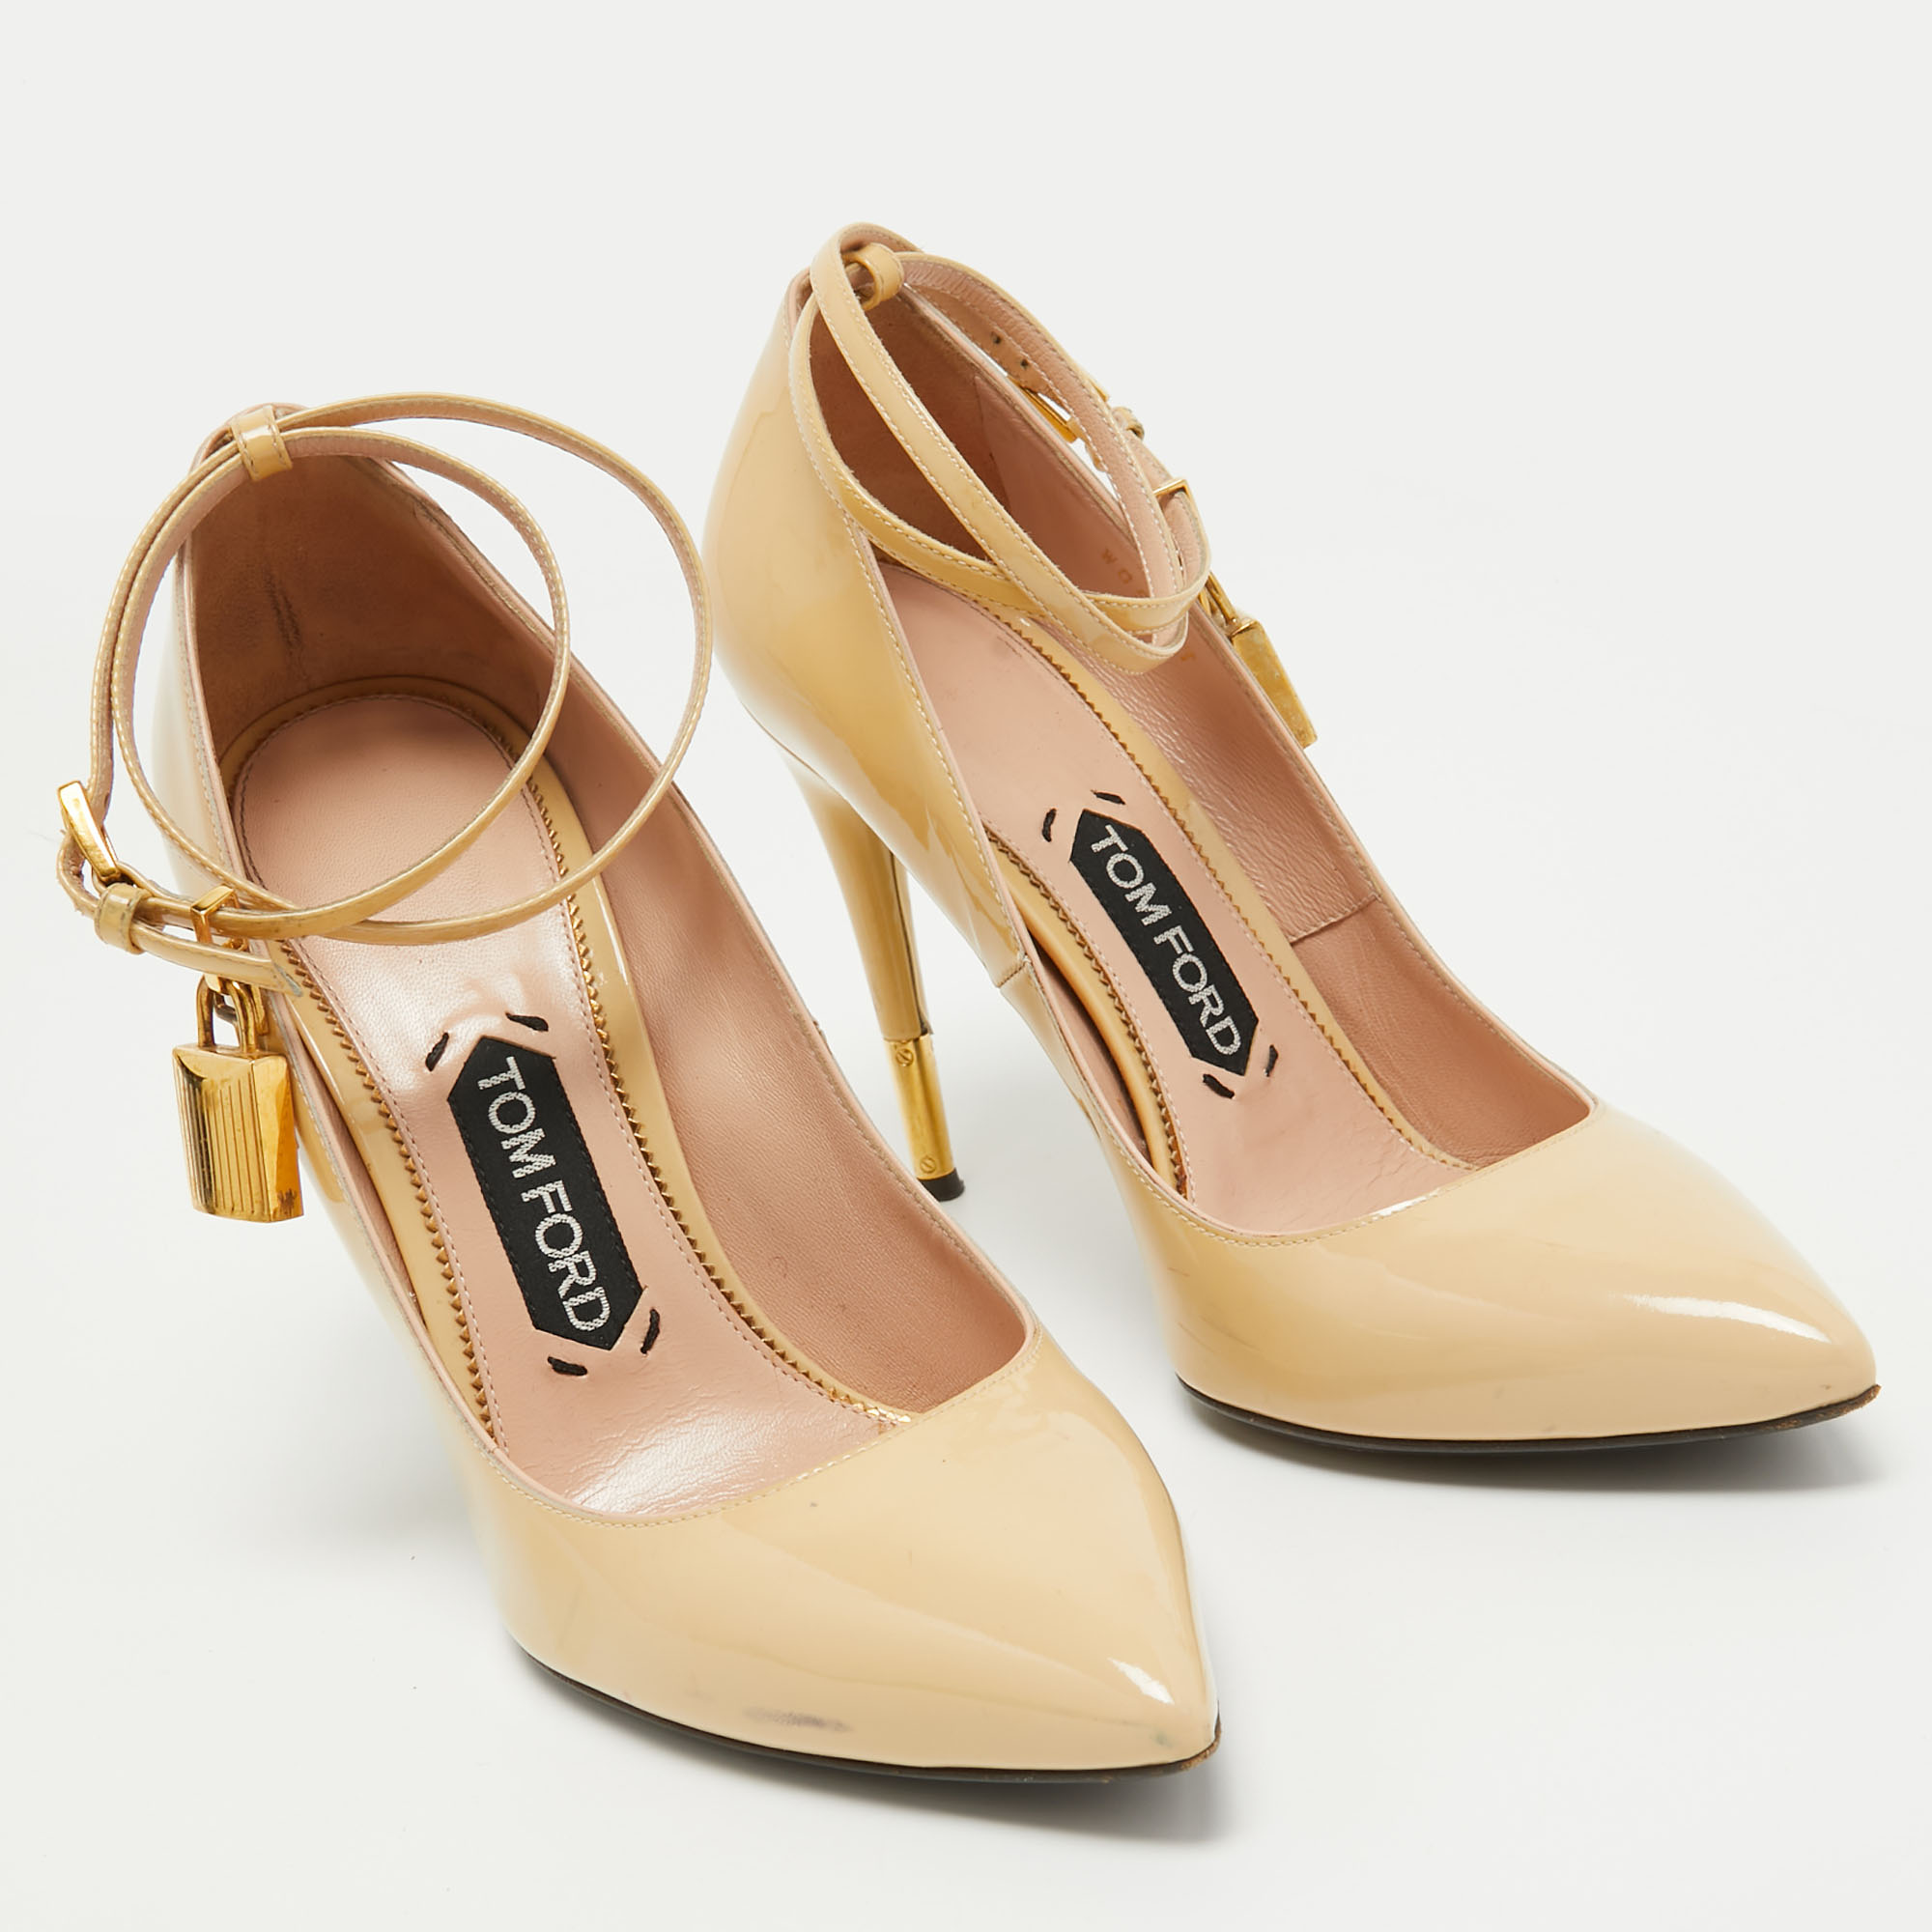 Tom Ford Beige Patent Leather Padlock Pumps Size 38.5